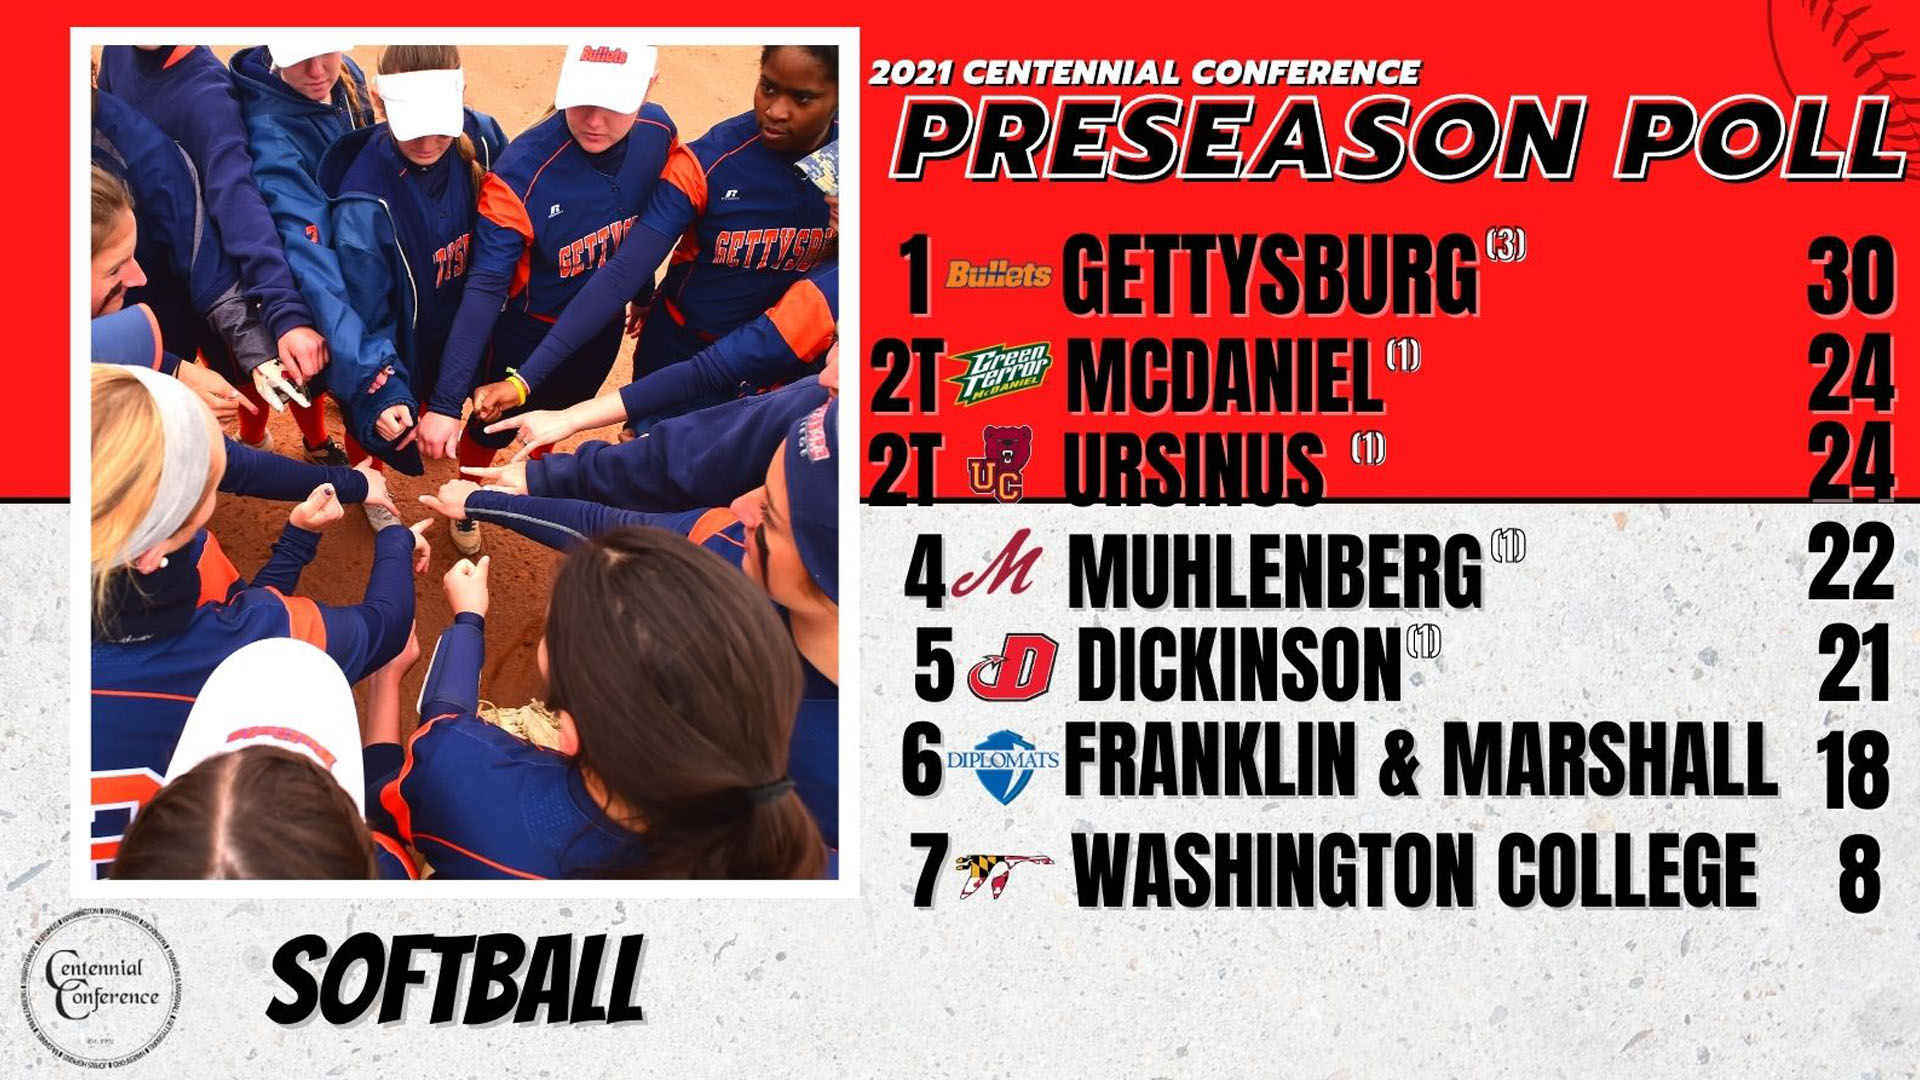 Gettysburg Tabbed Favorite in Centennial Softball Poll; Five Receive First-Place Votes